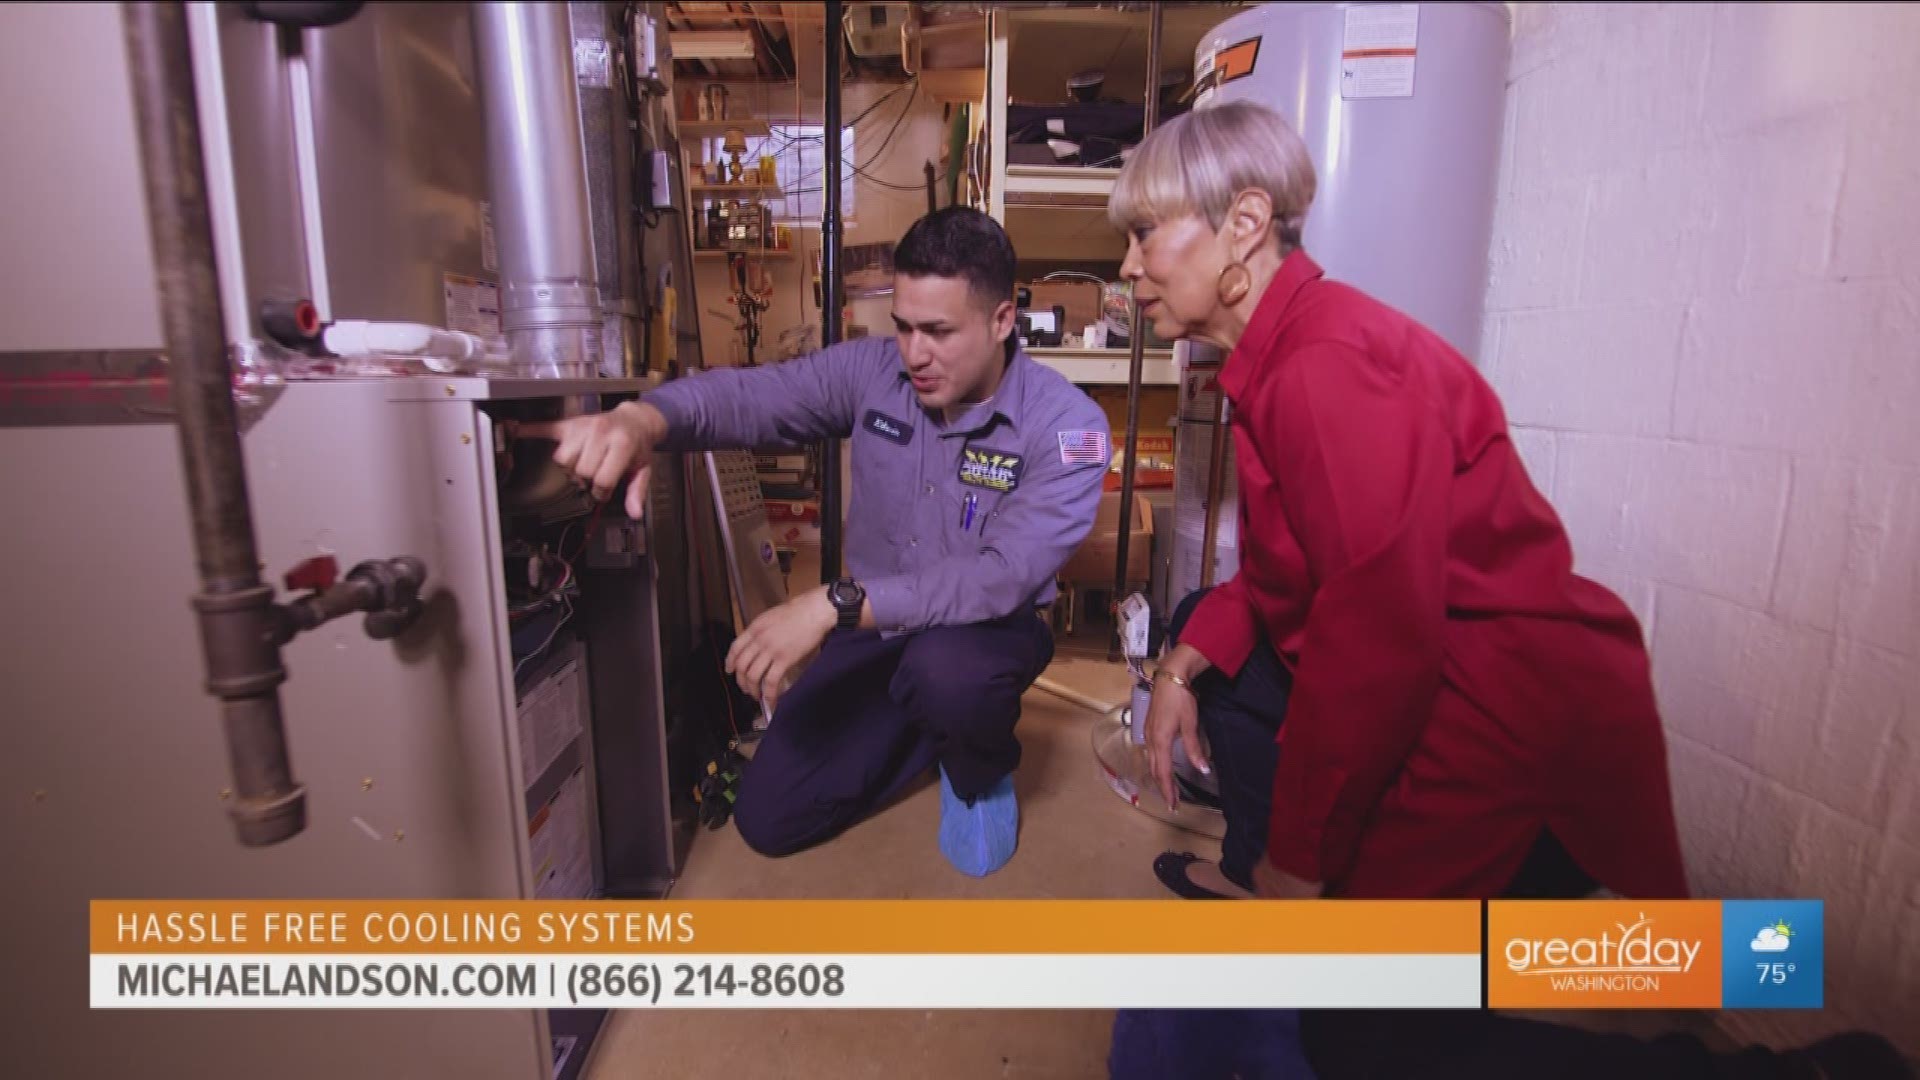 Basim Mansour of Michael and Son tells us how to about their hassle free cooling system program. Call 866-214-8608 during the month of June 2019 and get $500 off their hassle free cooling system, or go to michaelandson.com.